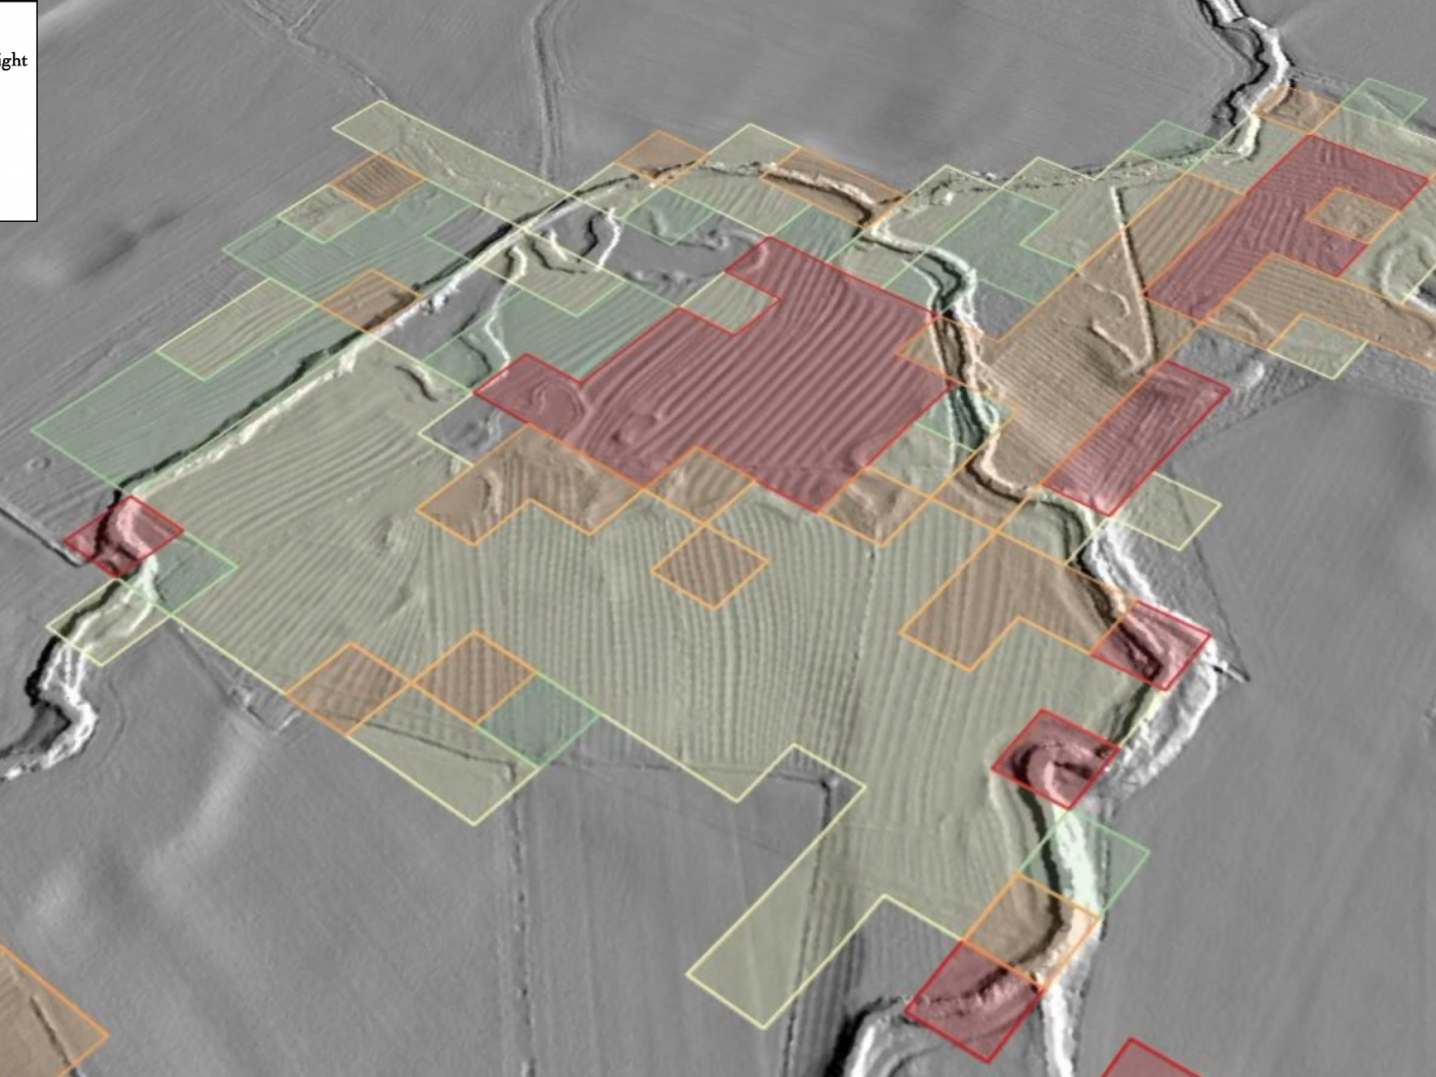 A LiDAR image showing image segmentation results of ridge and furrow earthworks (Medieval ploughing remains) in Northumberland, England.